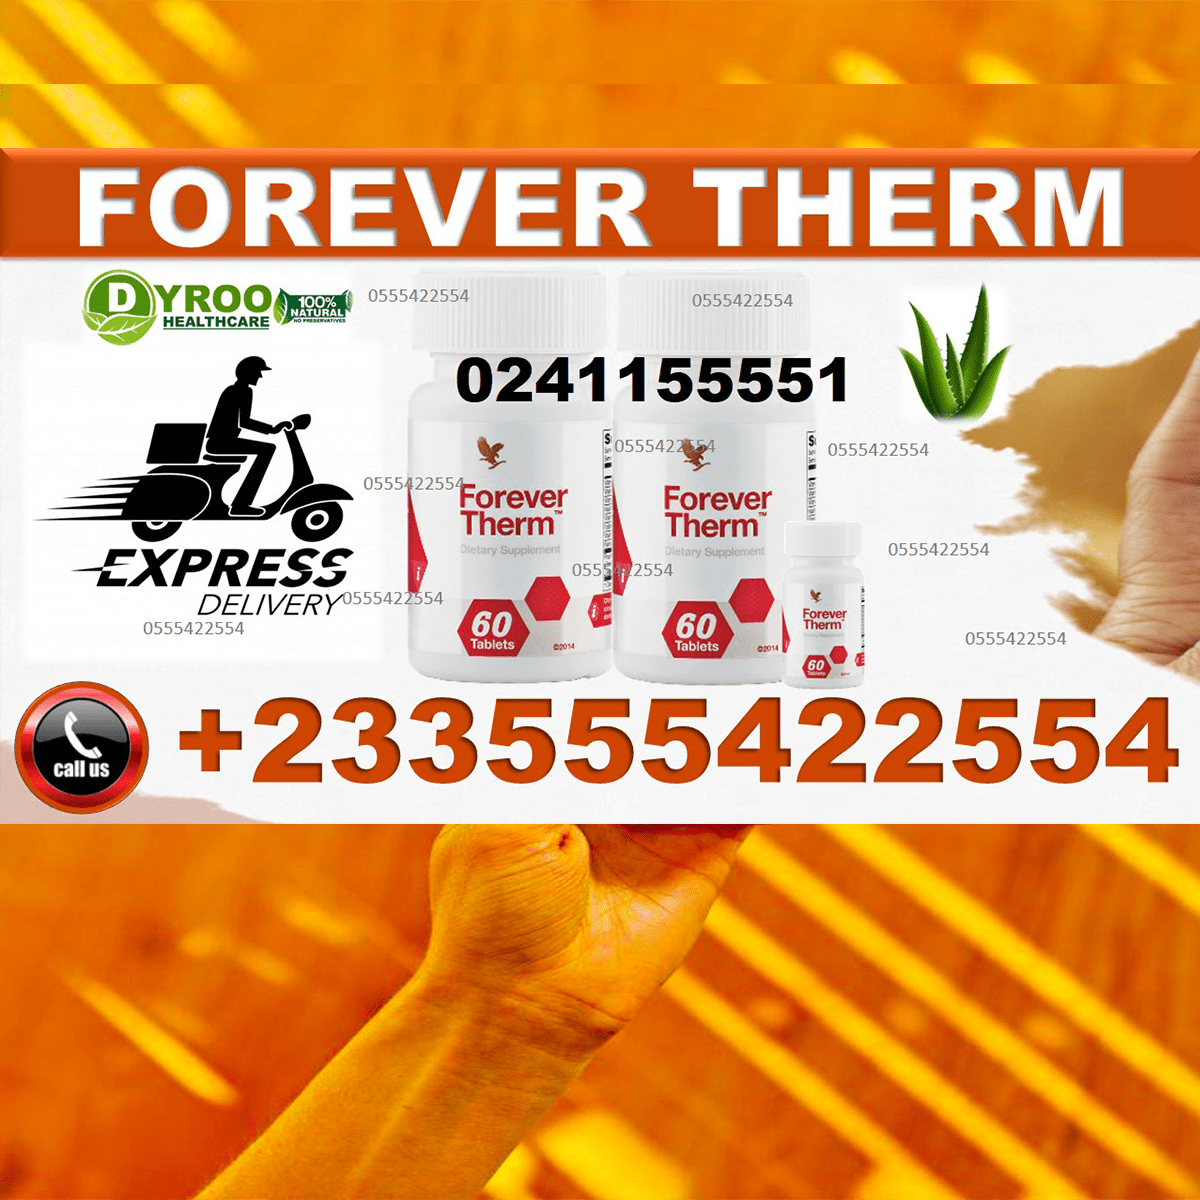 Forever Therm in Ghana